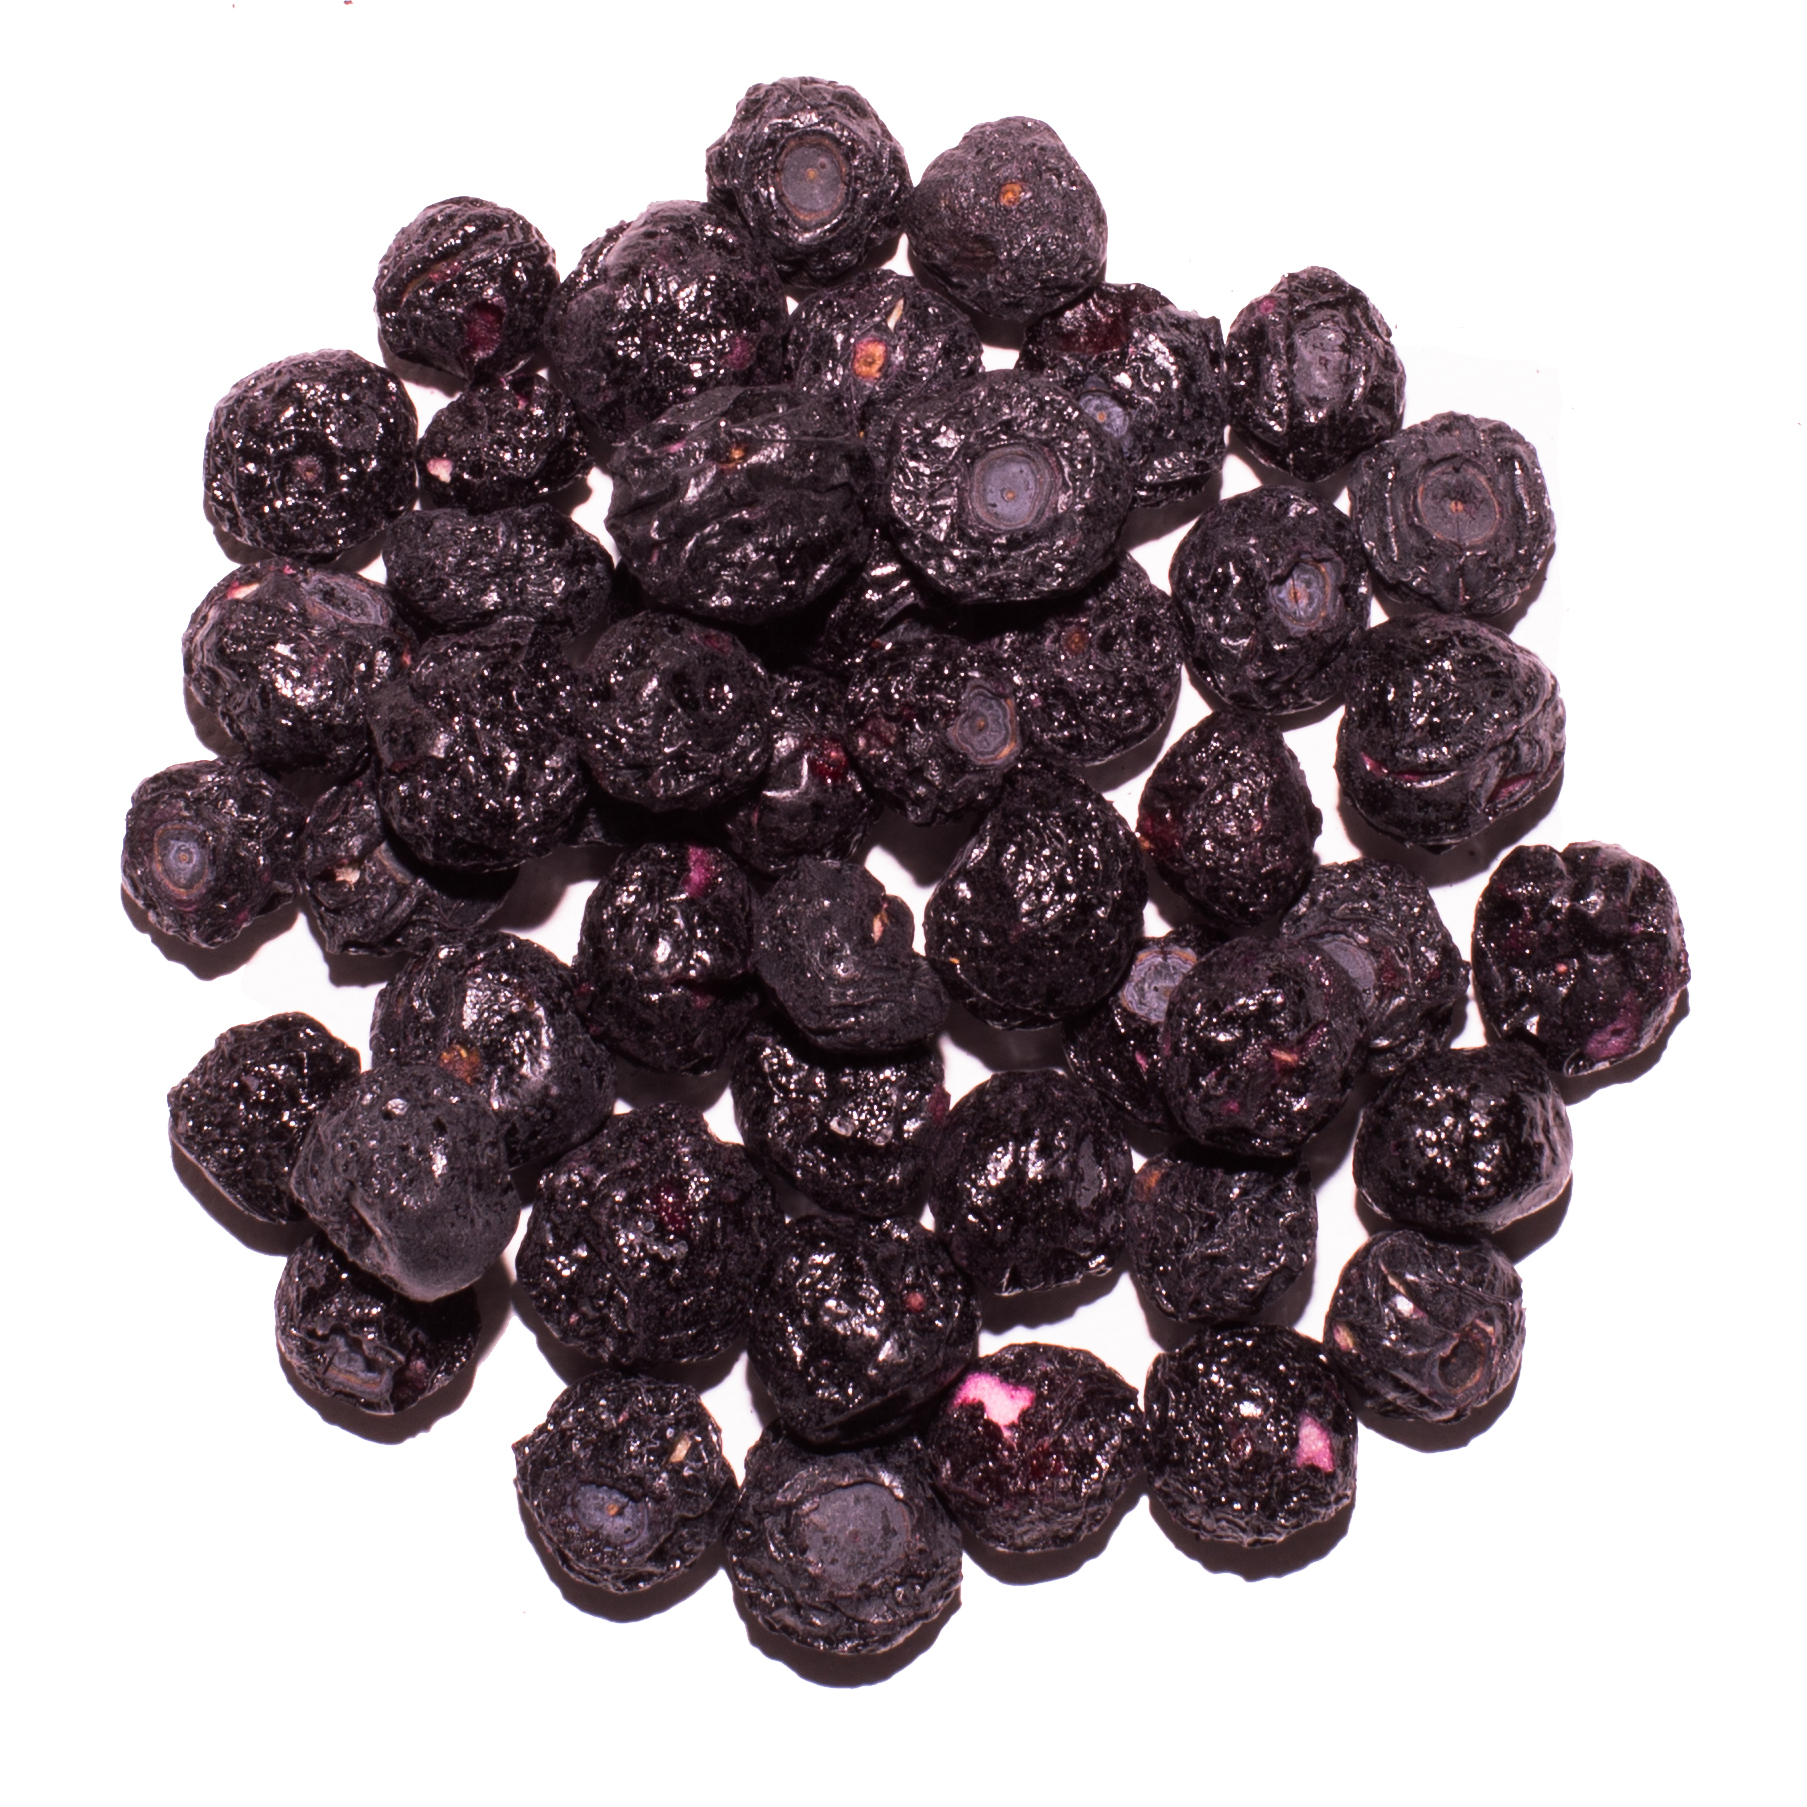 Natural Freeze Dry Fruit Freeze Dried Blueberry Whole